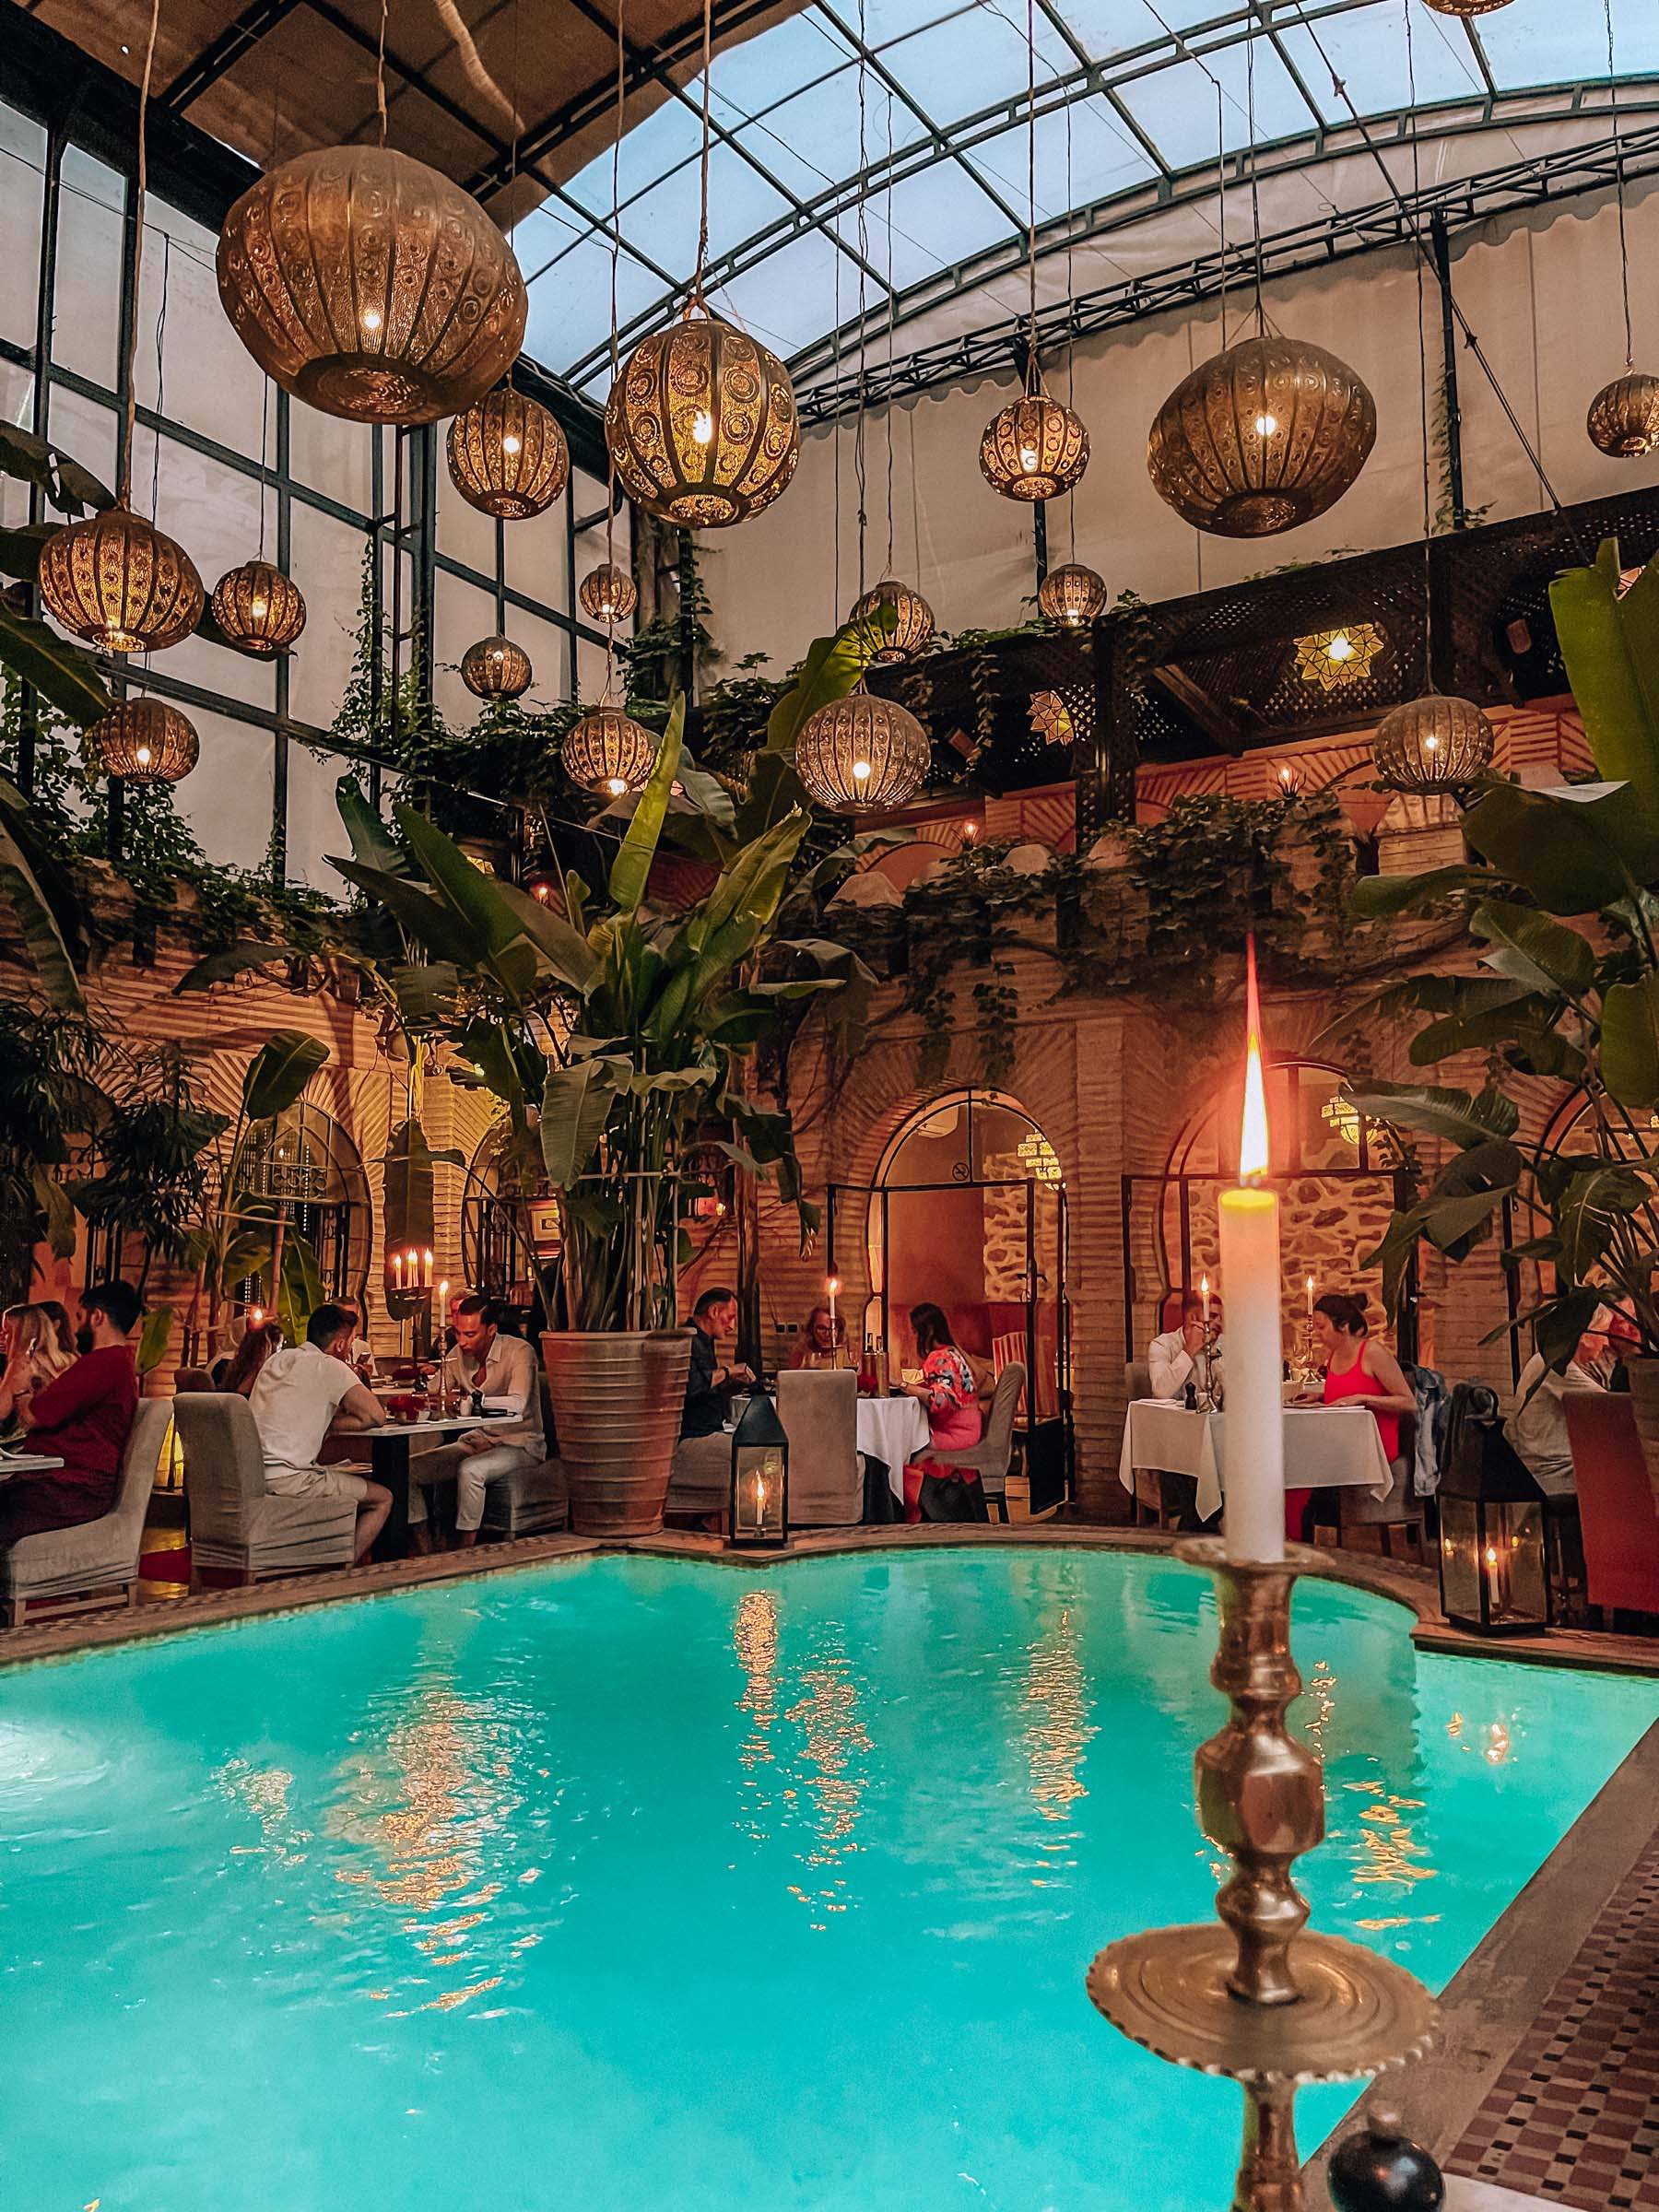 Marrakech Nightlife: What to Do and Where to Go